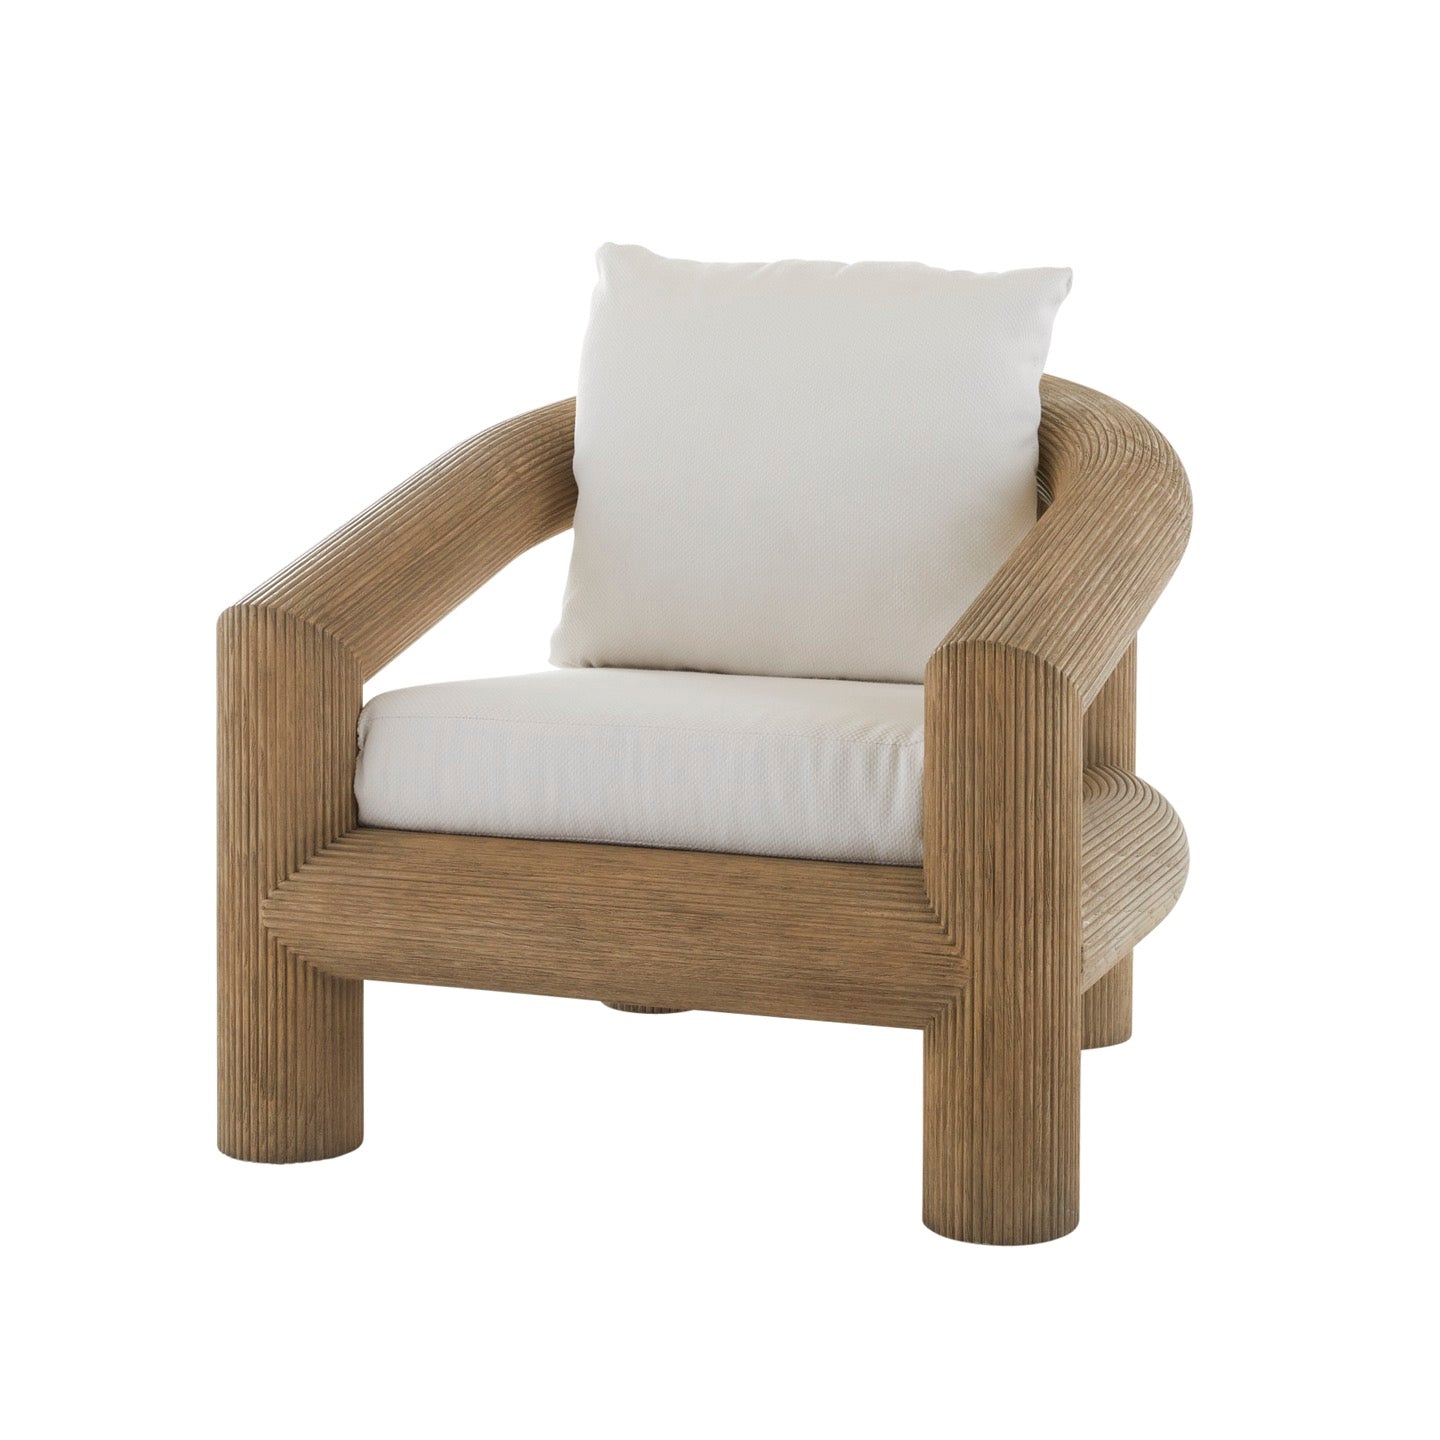 Easley Outdoor Chair